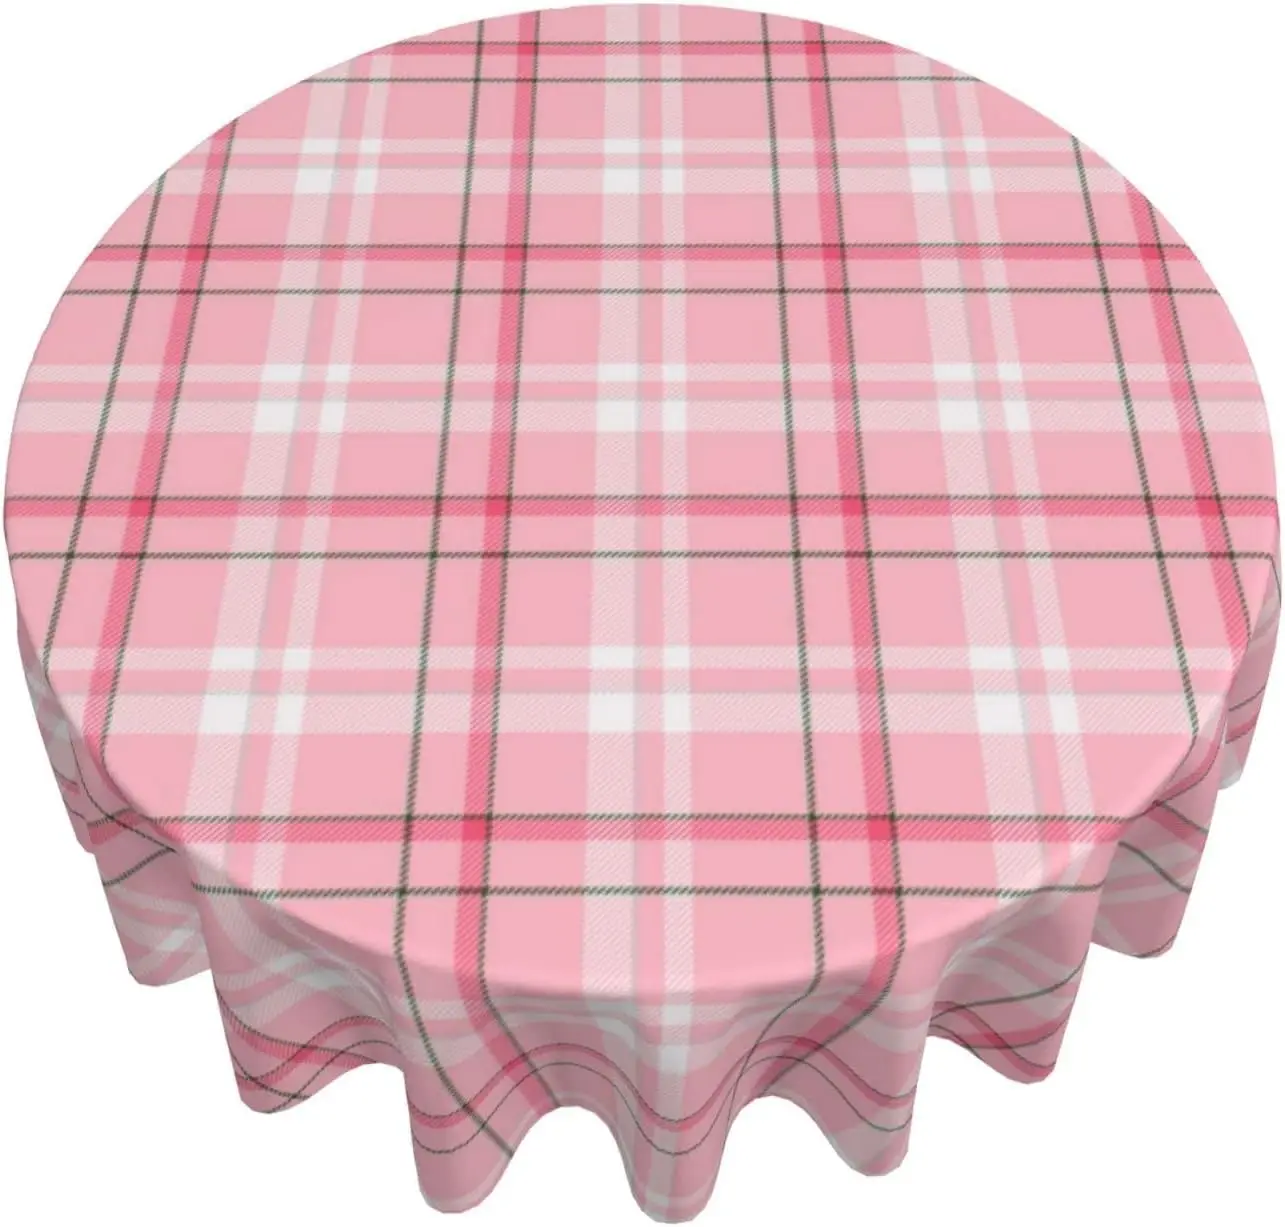 

Valentines Day Tablecloth Round 60 Inch Romantic Buffalo Pink Checkered Decorative Kitchen Dining Table Outdoor Party Patio